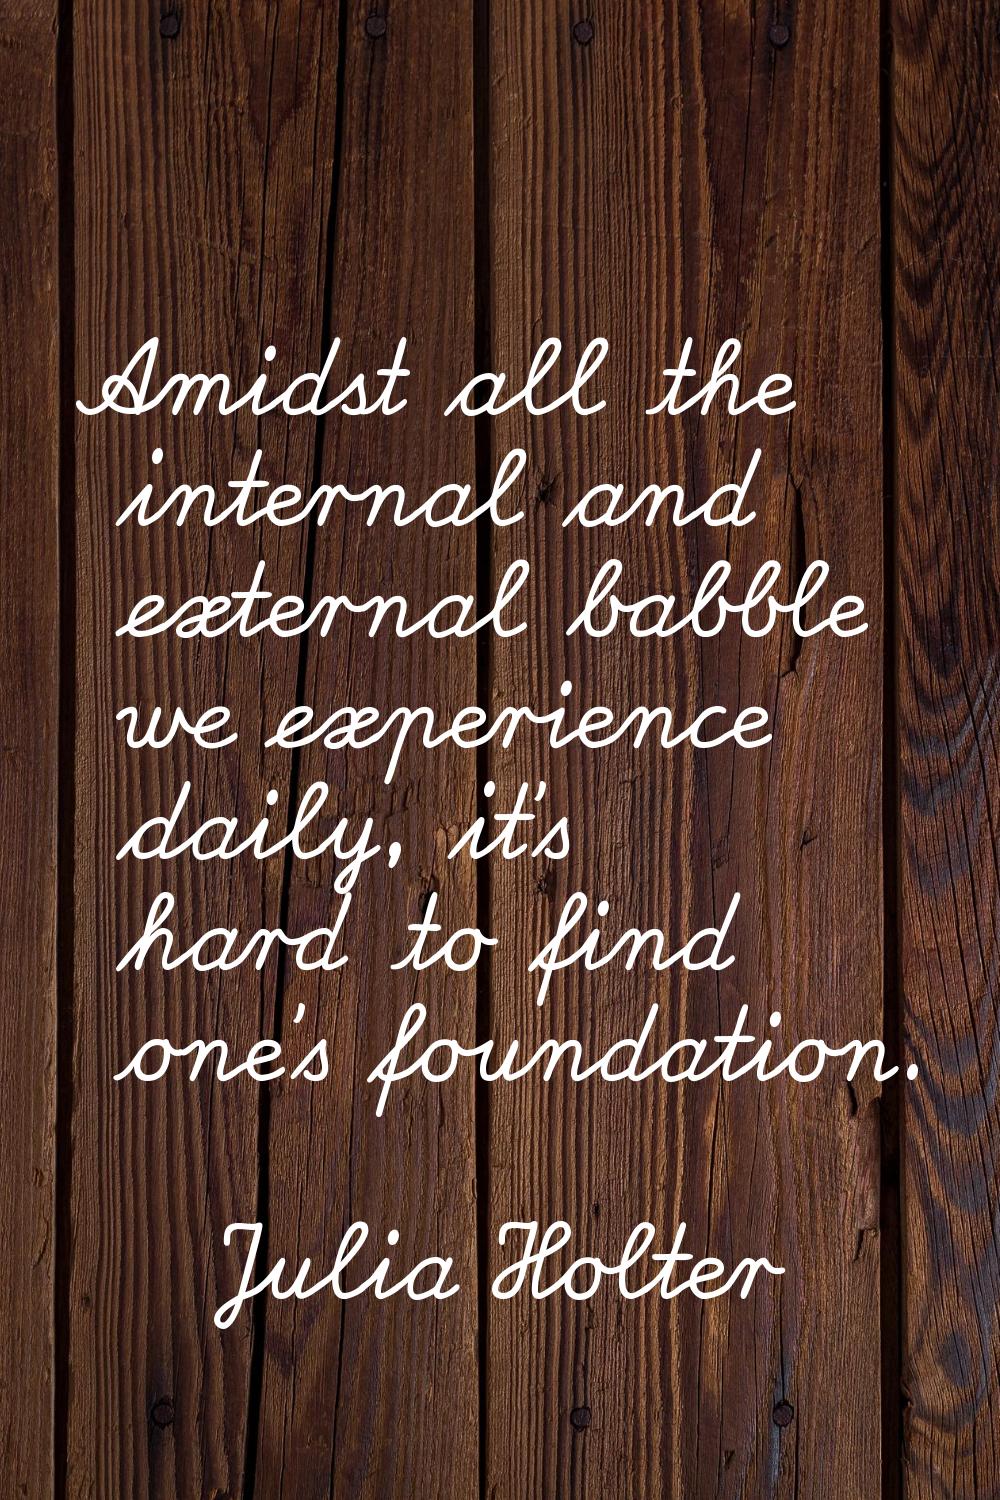 Amidst all the internal and external babble we experience daily, it's hard to find one's foundation